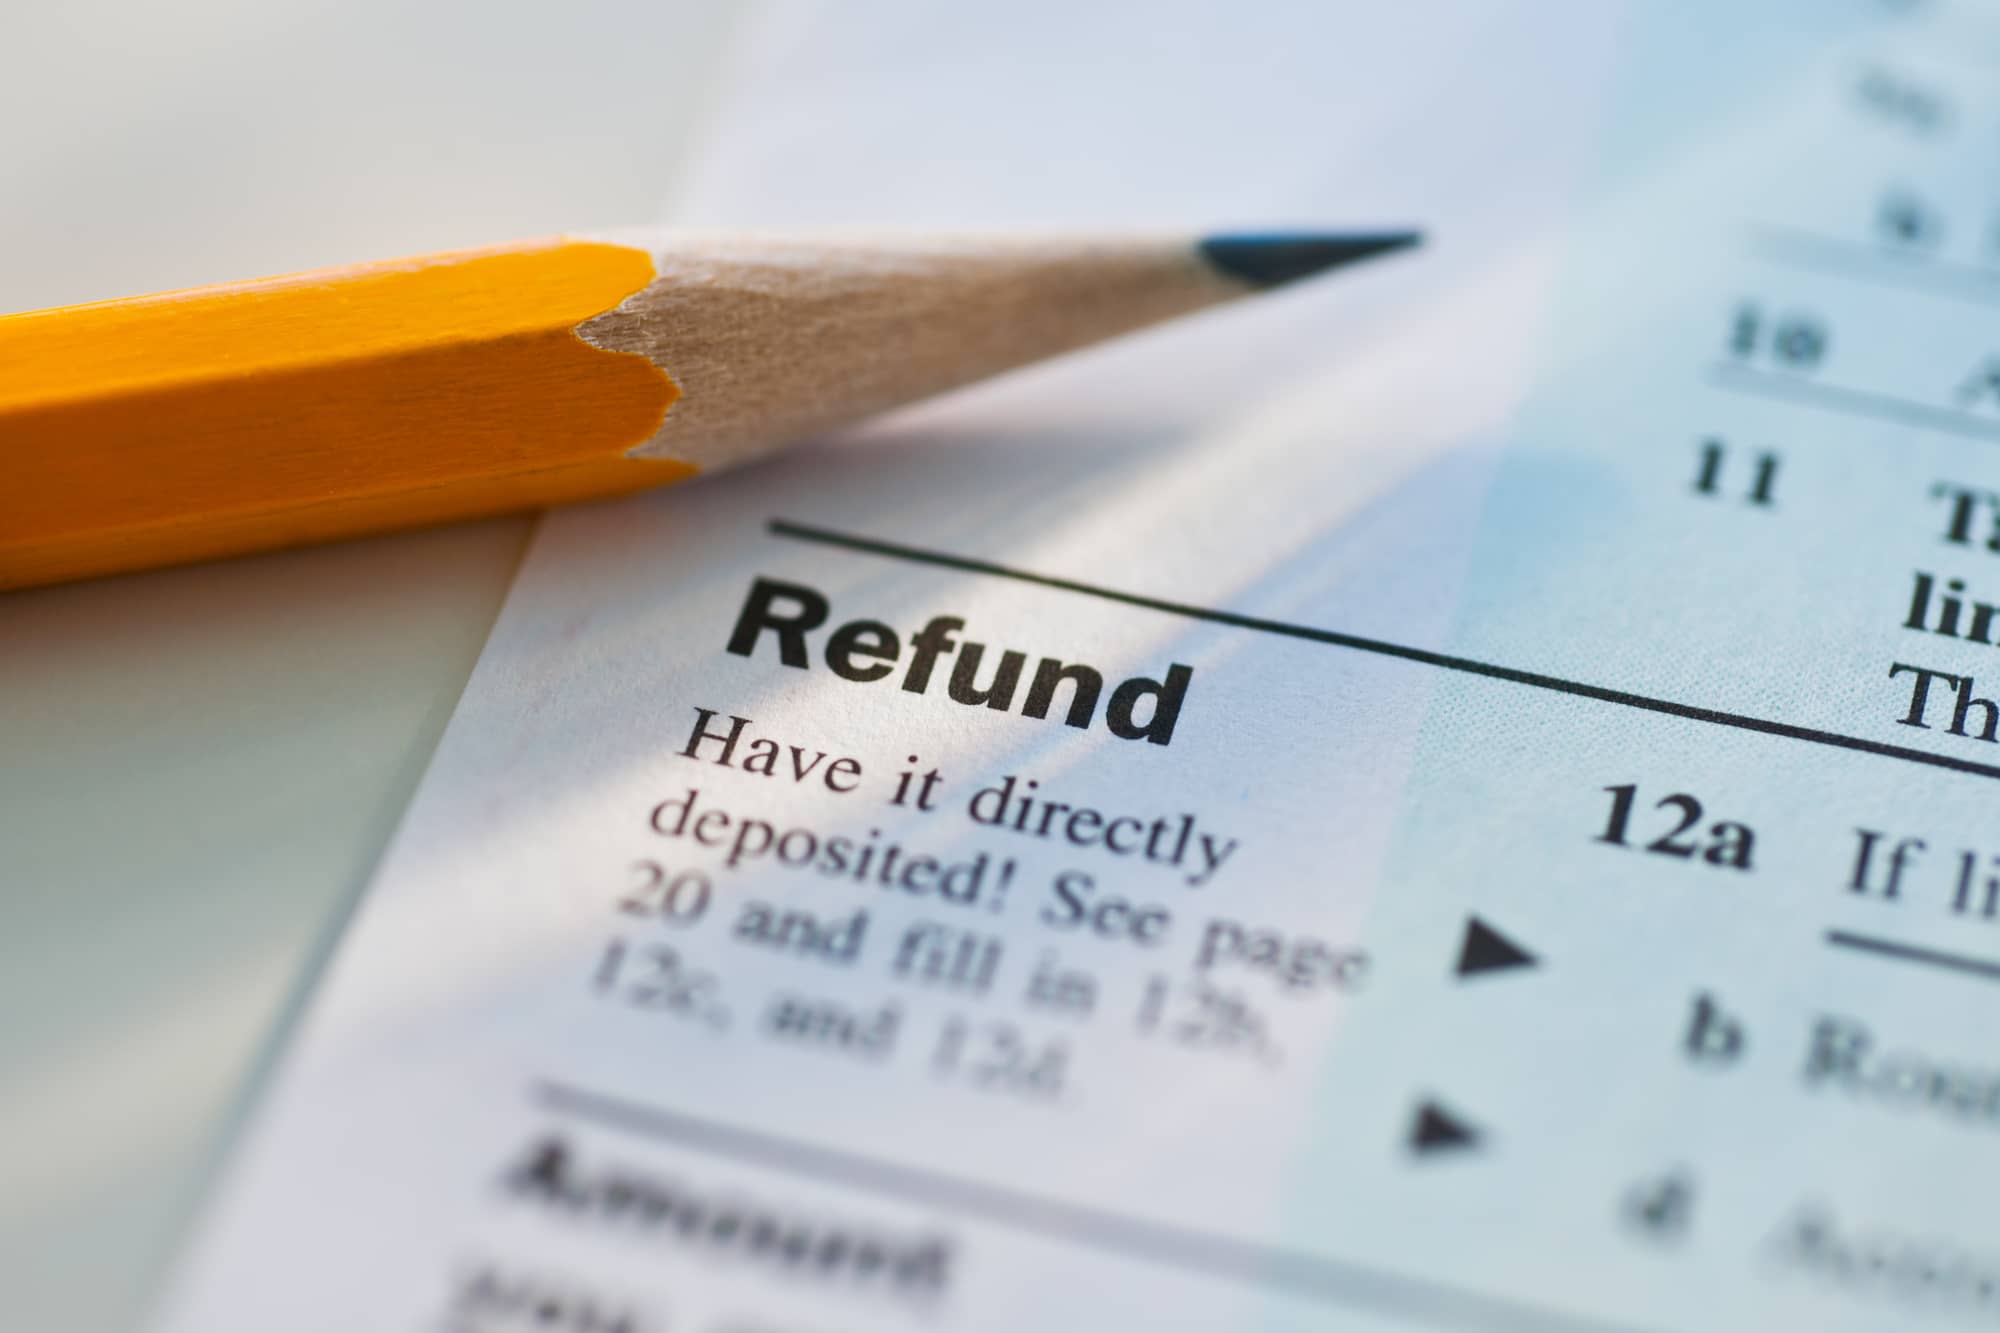 The next 10 words related to Tax refund